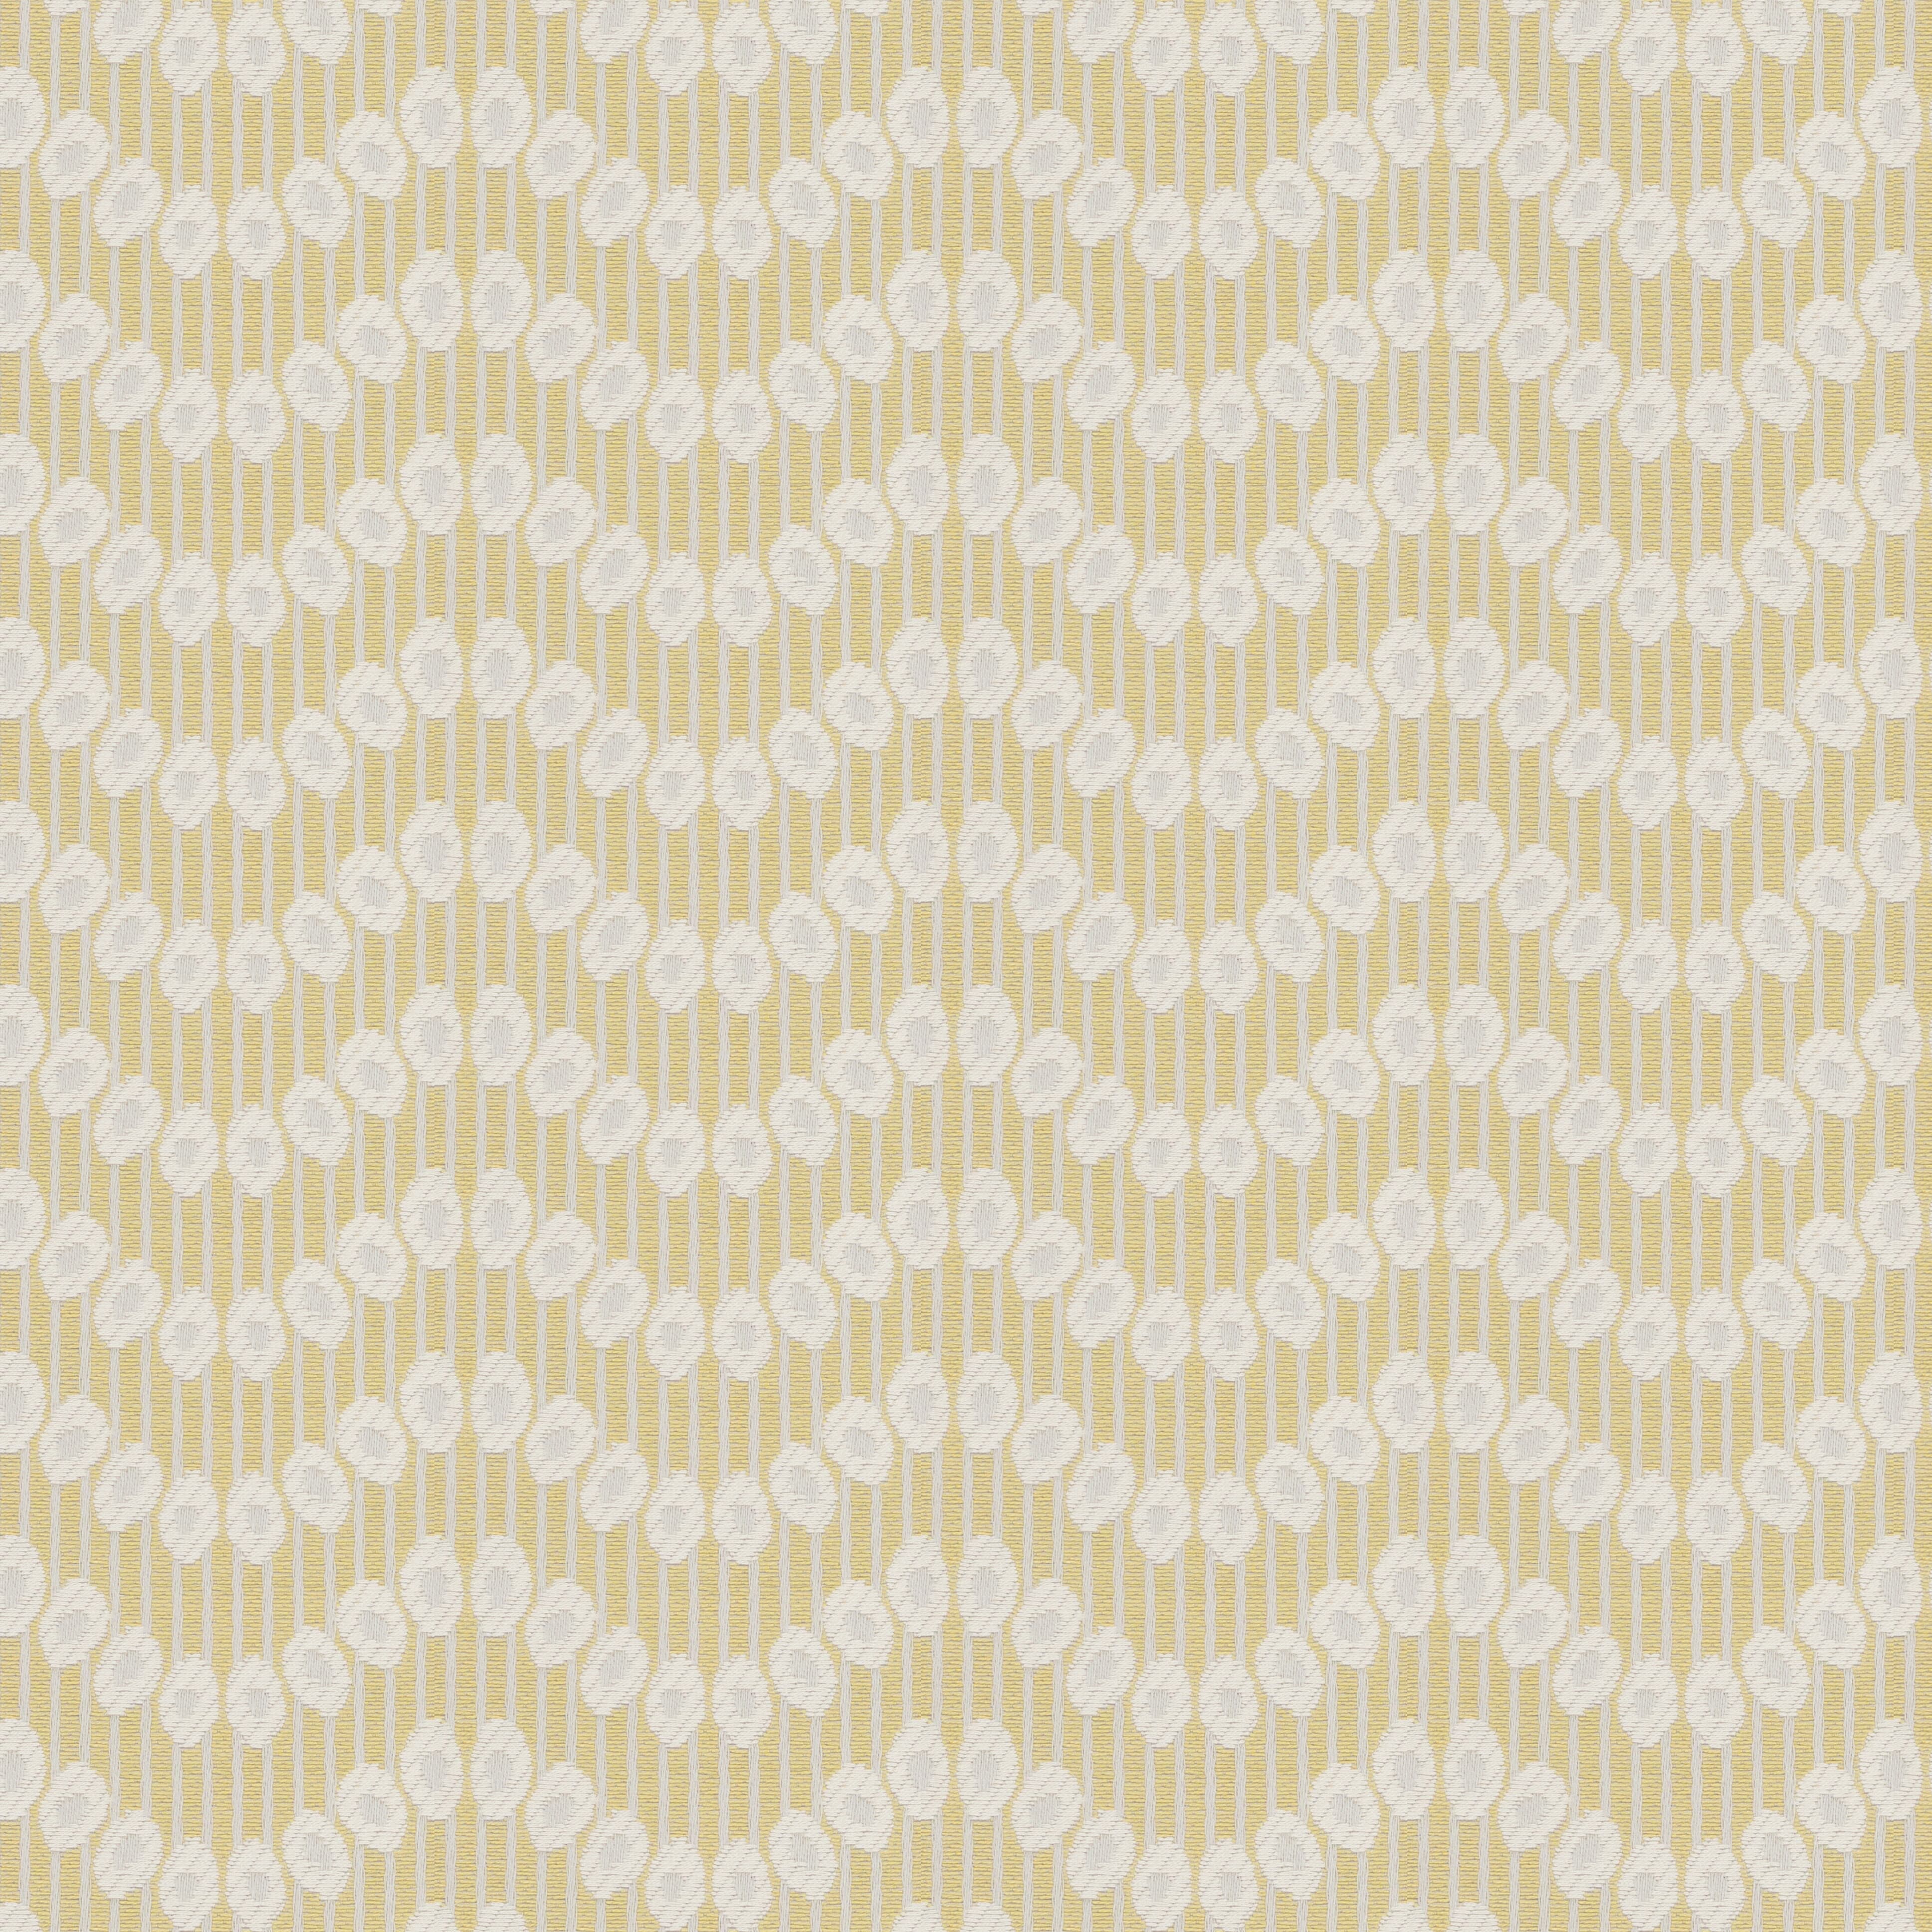 7832-4 Trailside Glow by Stout Fabric